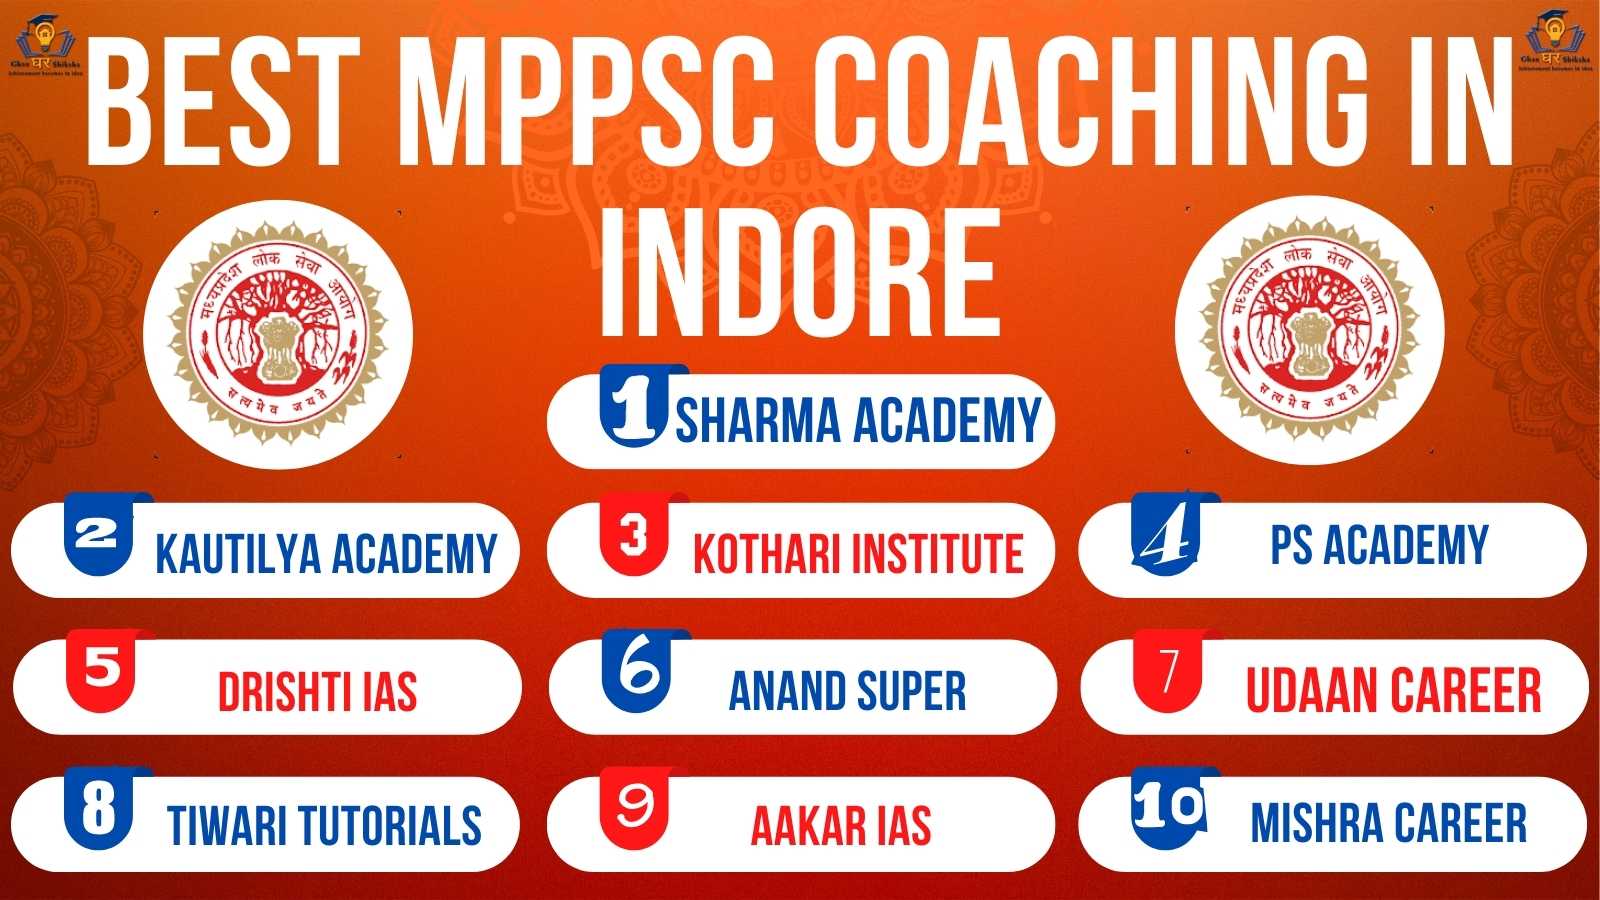 Best 10 MPPSC Coaching Centres In Indore